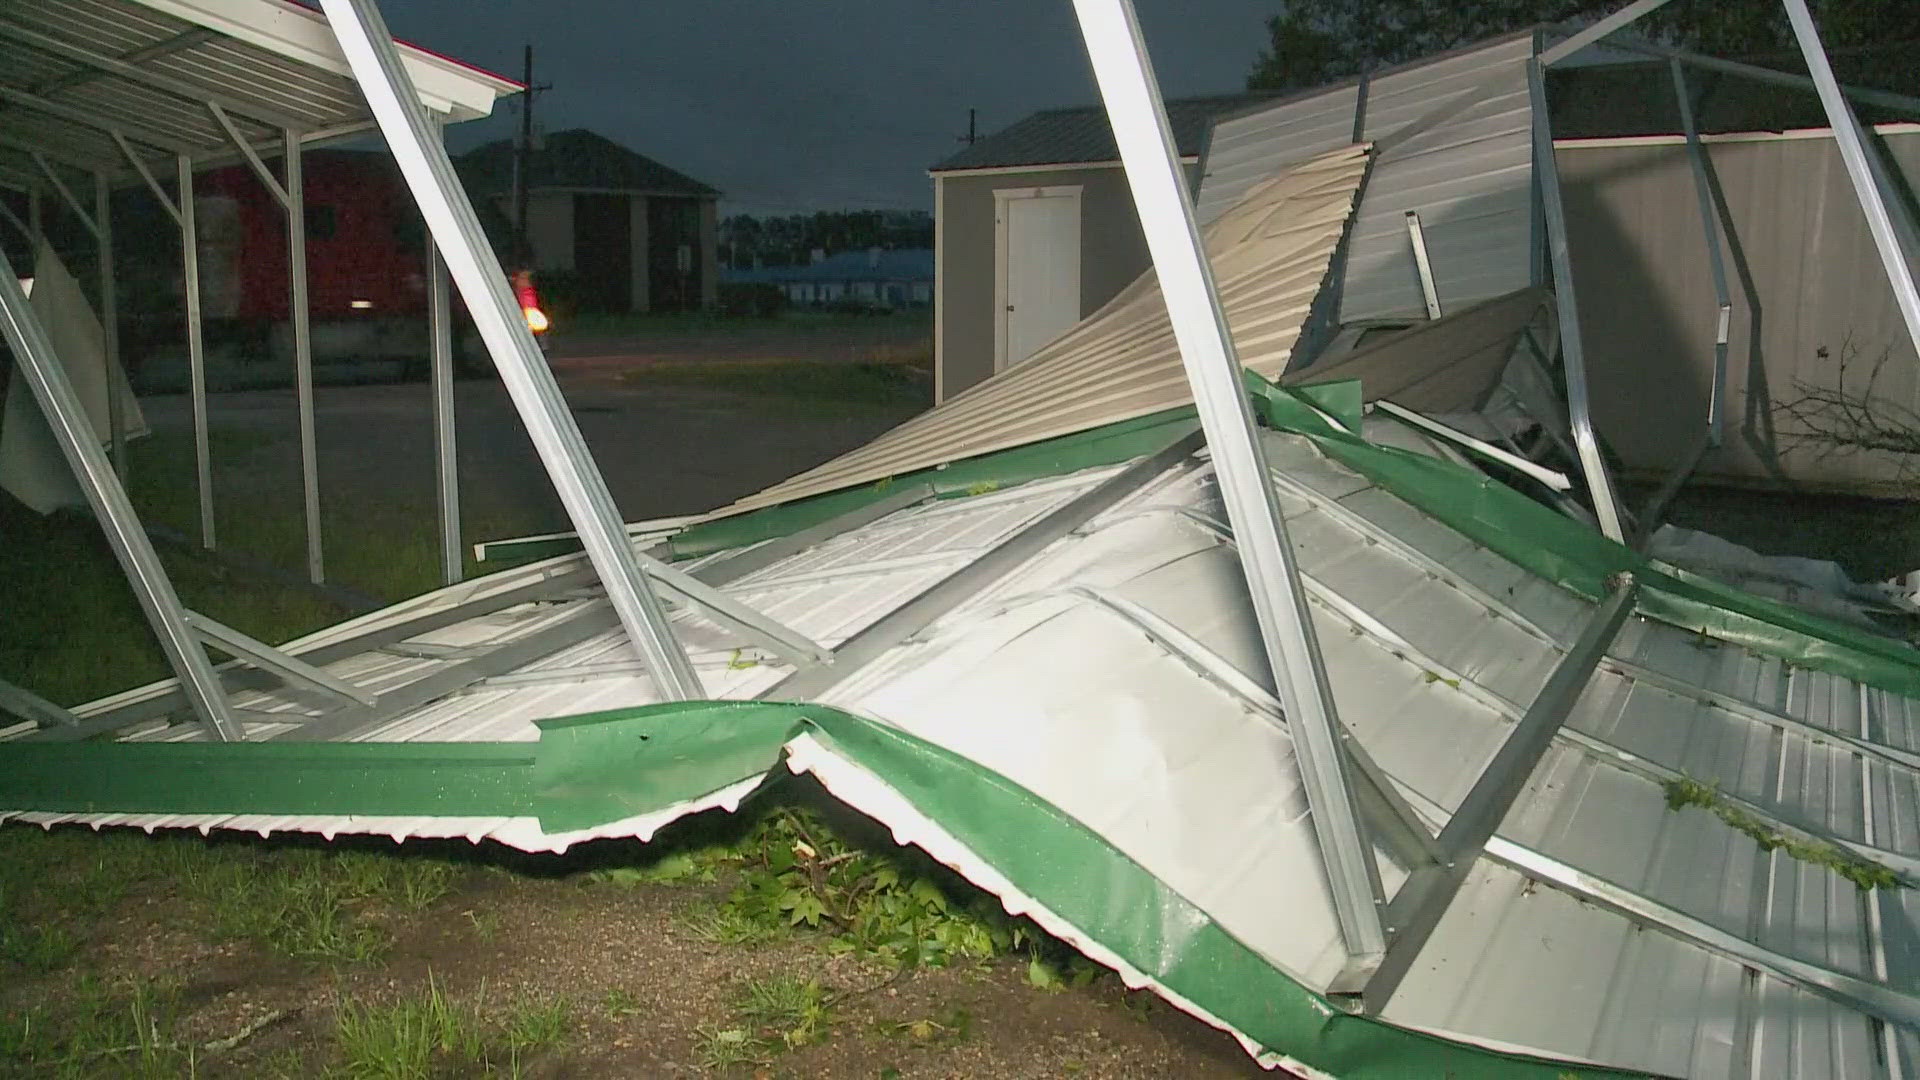 Tangipahoa Parish is also where our Whitney Miller found damaged buildings